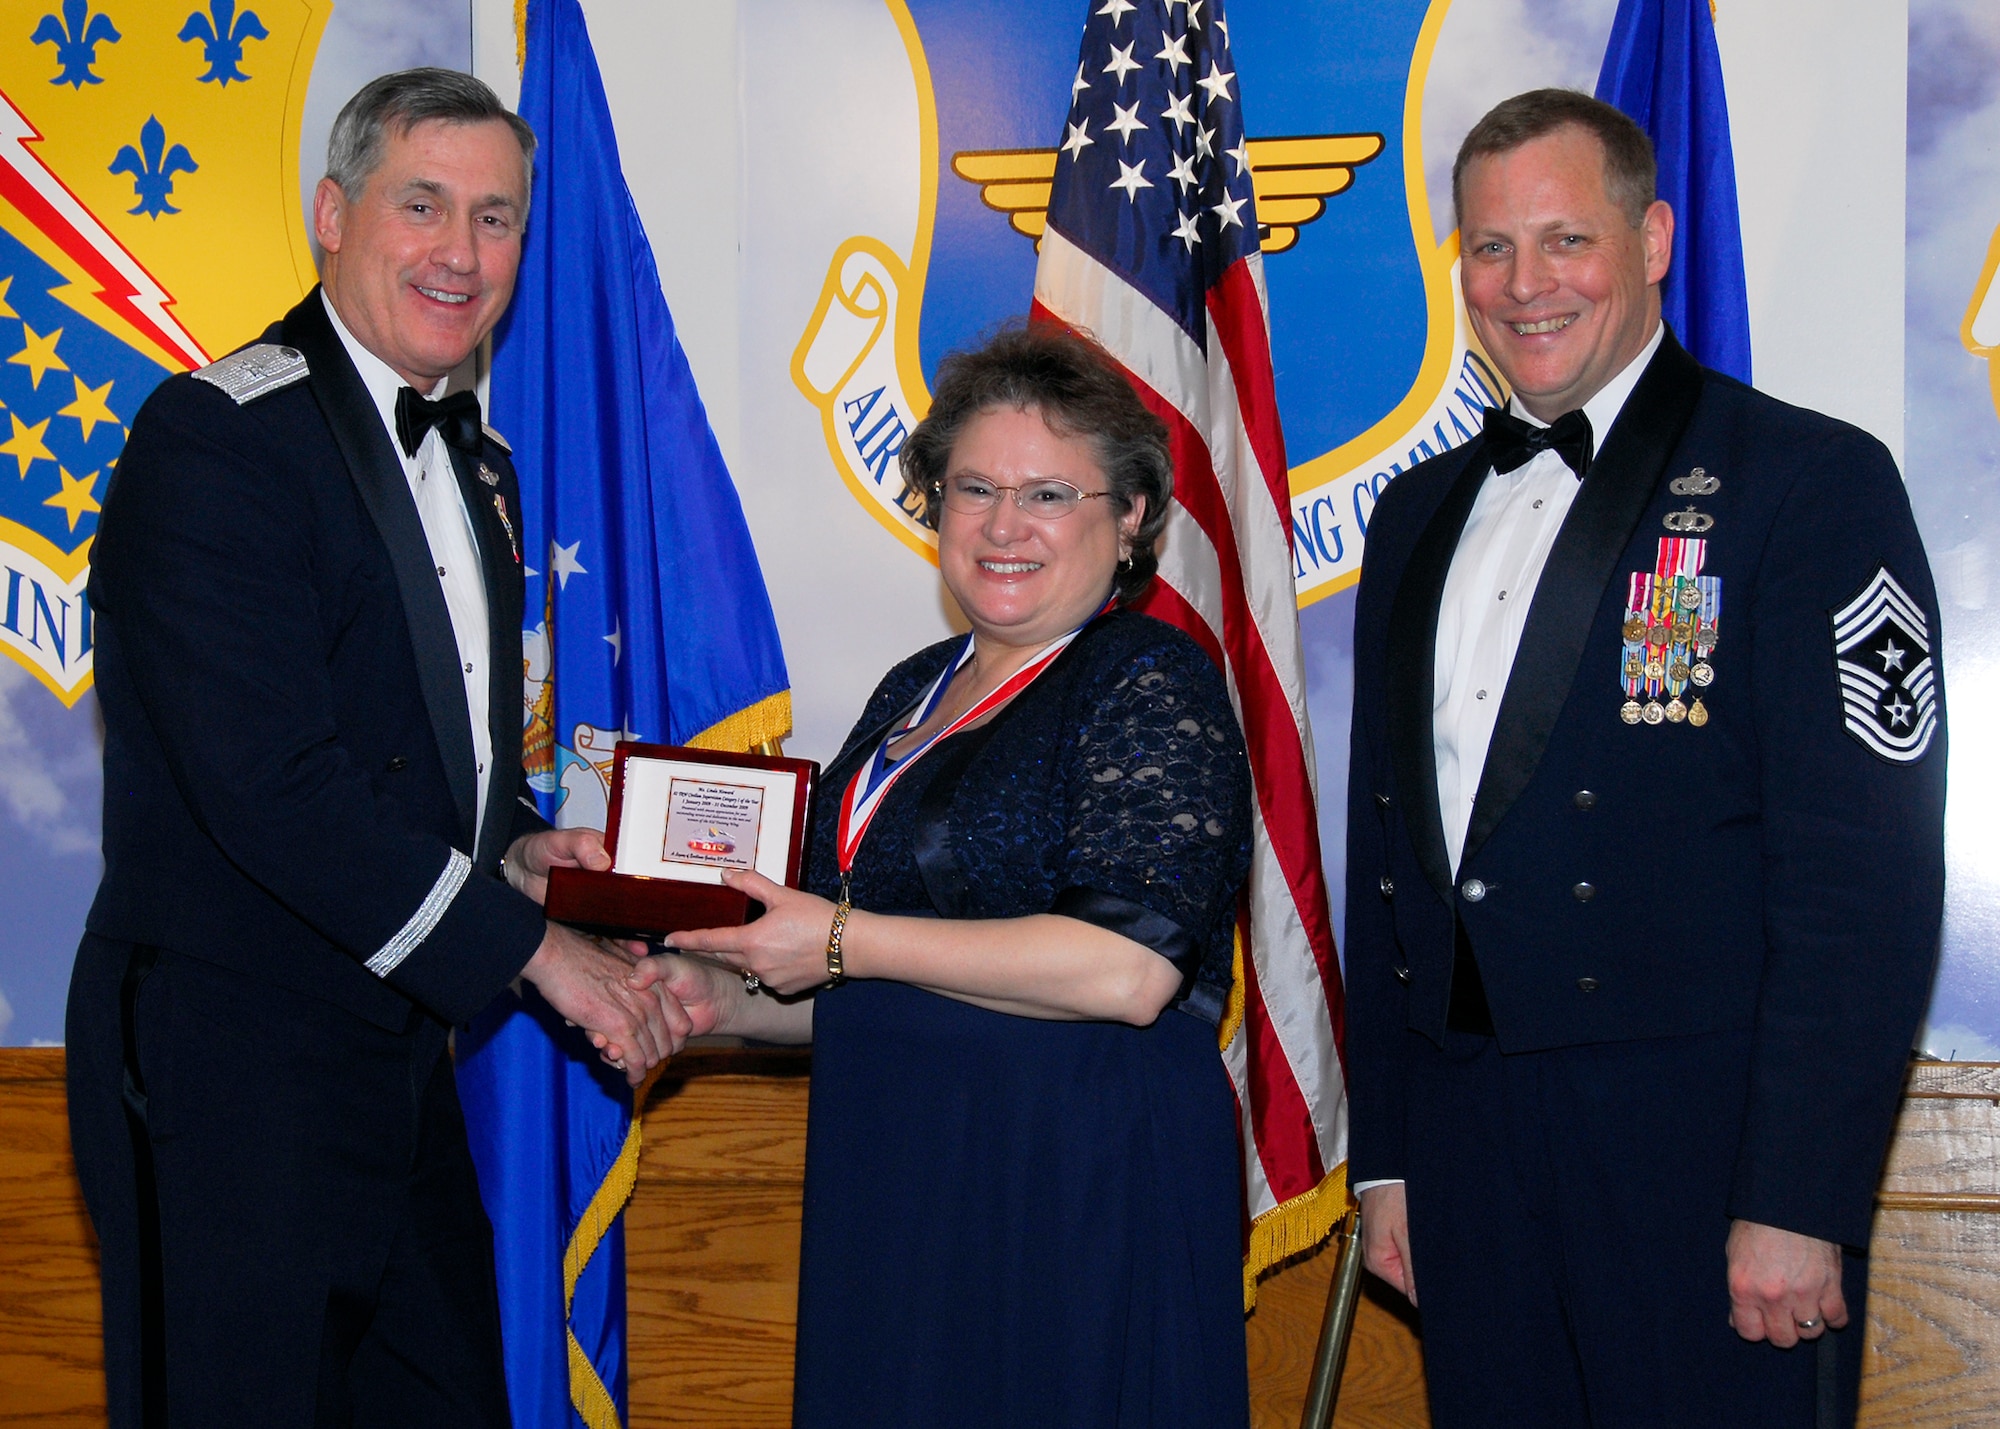 Brig. Gen. O.G. Mannon, 82nd Training Wing commander, presents Linda Howard, 82nd Force Support Squadron, with the Civilian Supervision Category I of the Year award March 5 during the 2009 82nd TRW Annual Awards banquet. Also pictured is wing Command Chief, Chief Master Sgt. Kenneth Sallinger. (U.S. Air Force photo/Harry Tonemah) 